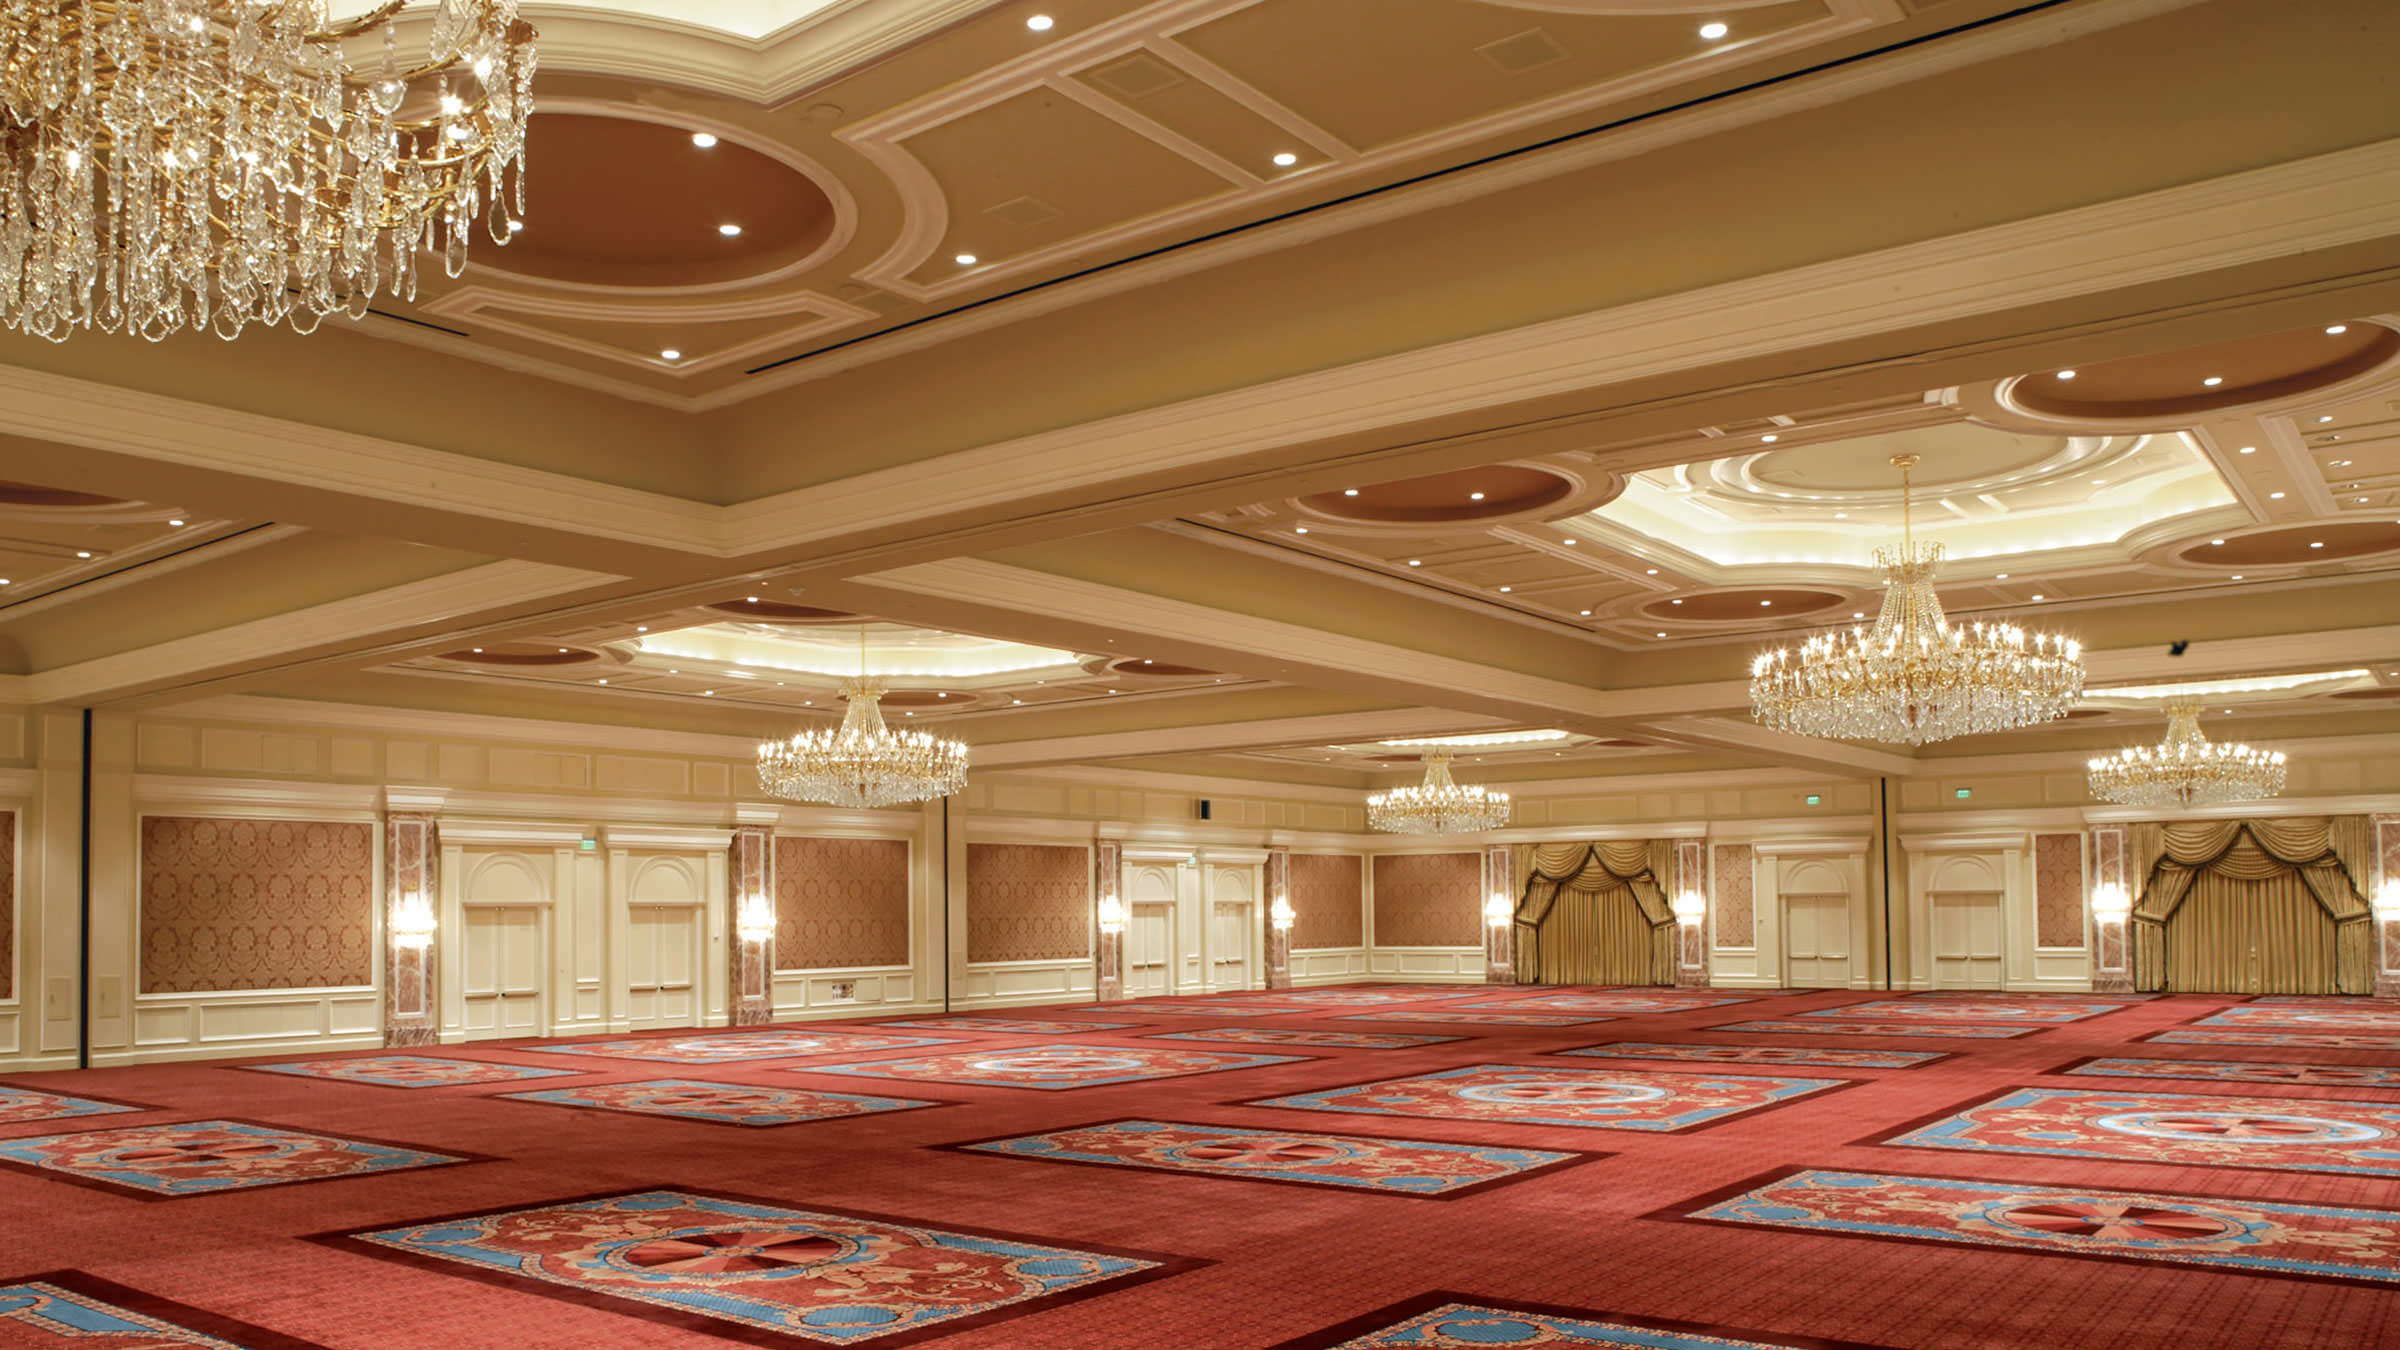 Grand Ballroom meeting and event space at The Grand America Hotel with crystal chandeliers.